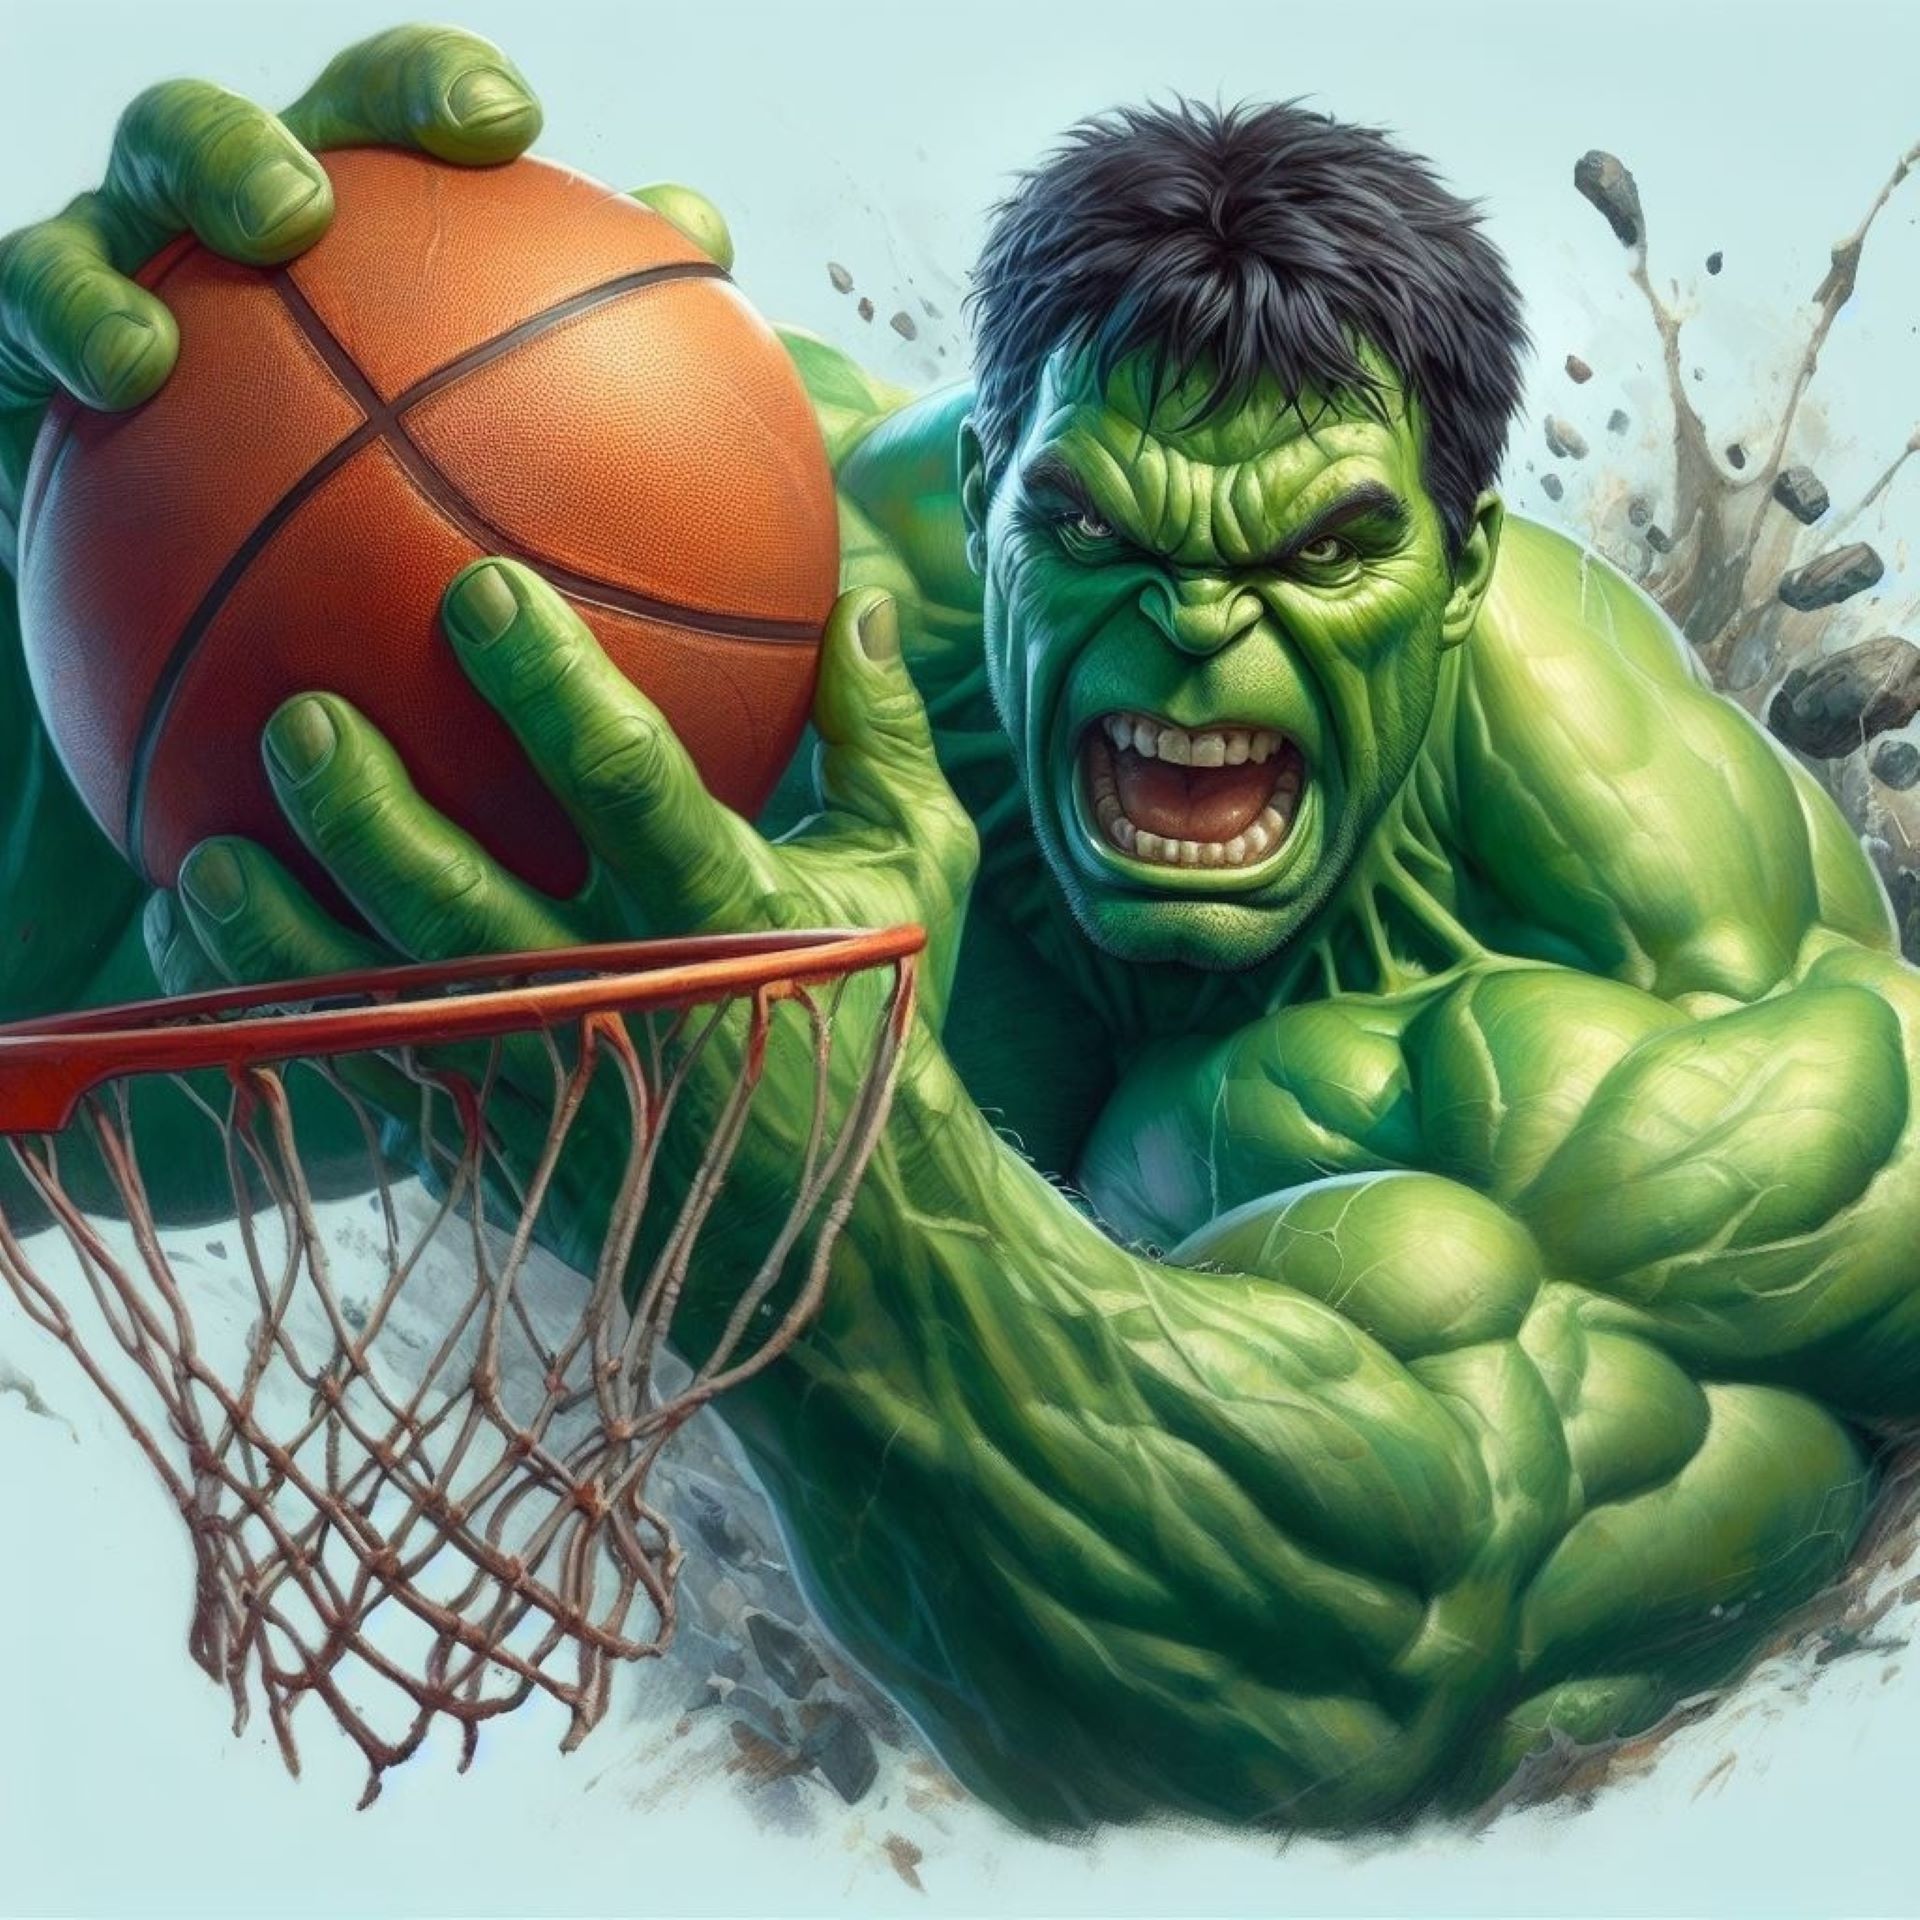 Hulk with the ball